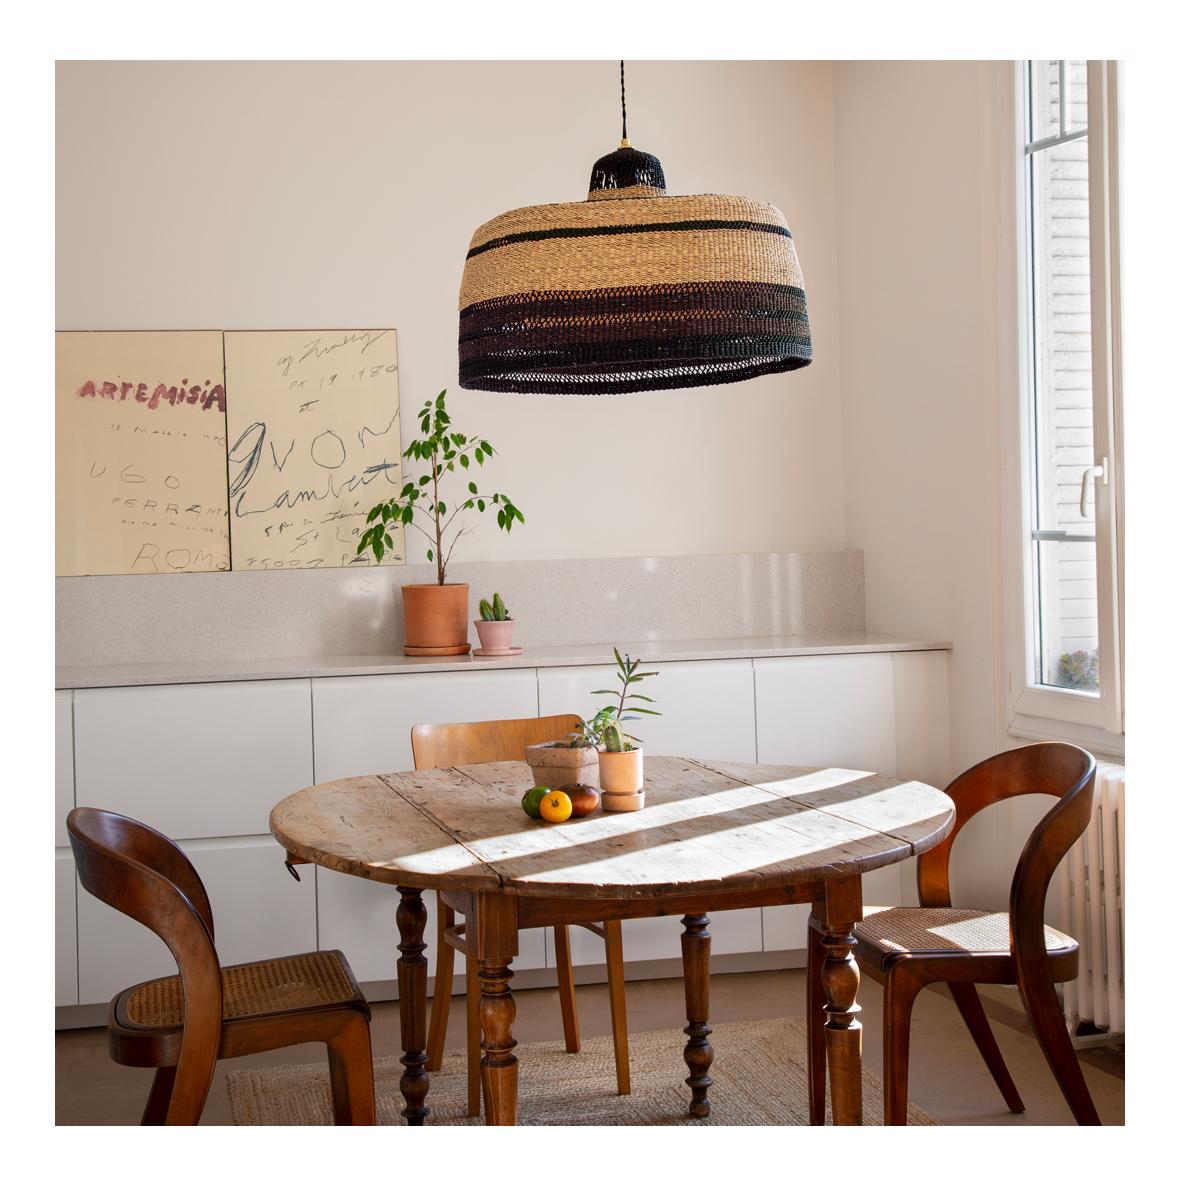 Large woven pendant lamp : 
Warm and earthy
Colour: Terracotta orange

Do you love handmade objects but are looking for something more elevated to hang in your room? This large pendant lamp with black, earthy orange and natural stripes will fill